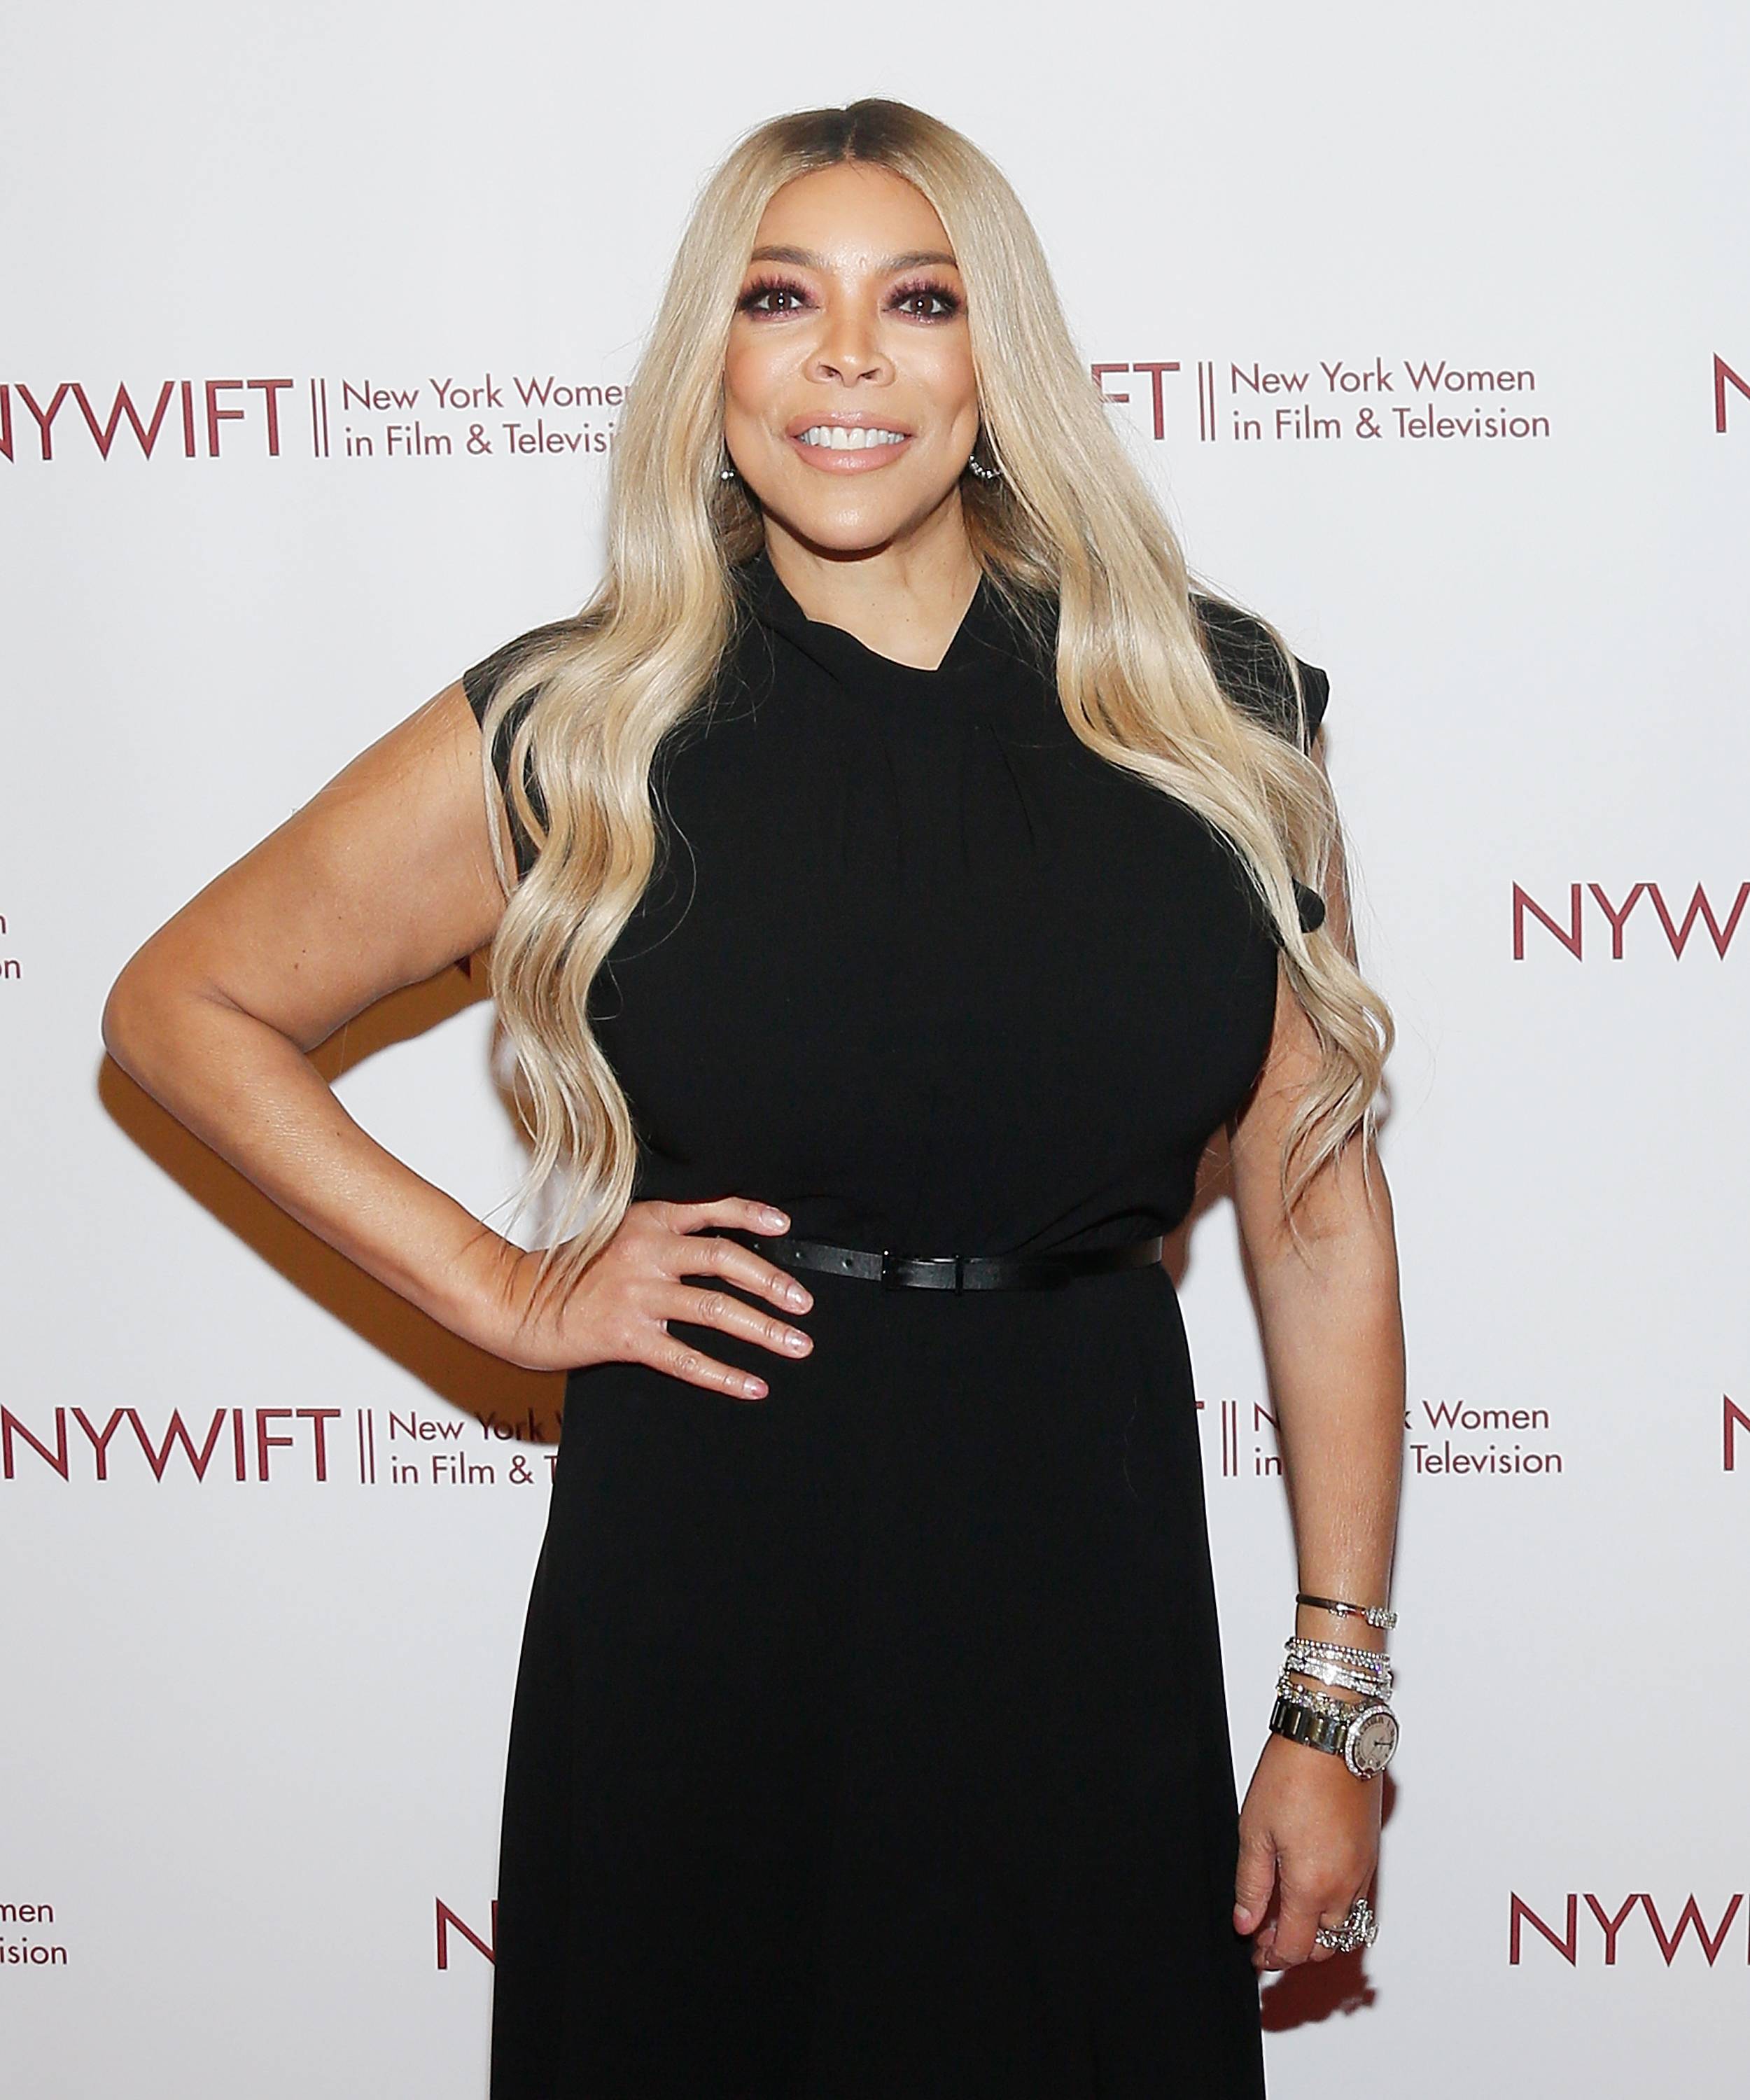 attends the 2019 NYWIFT Muse Awards at the New York Hilton Midtown on December 10, 2019 in New York City.